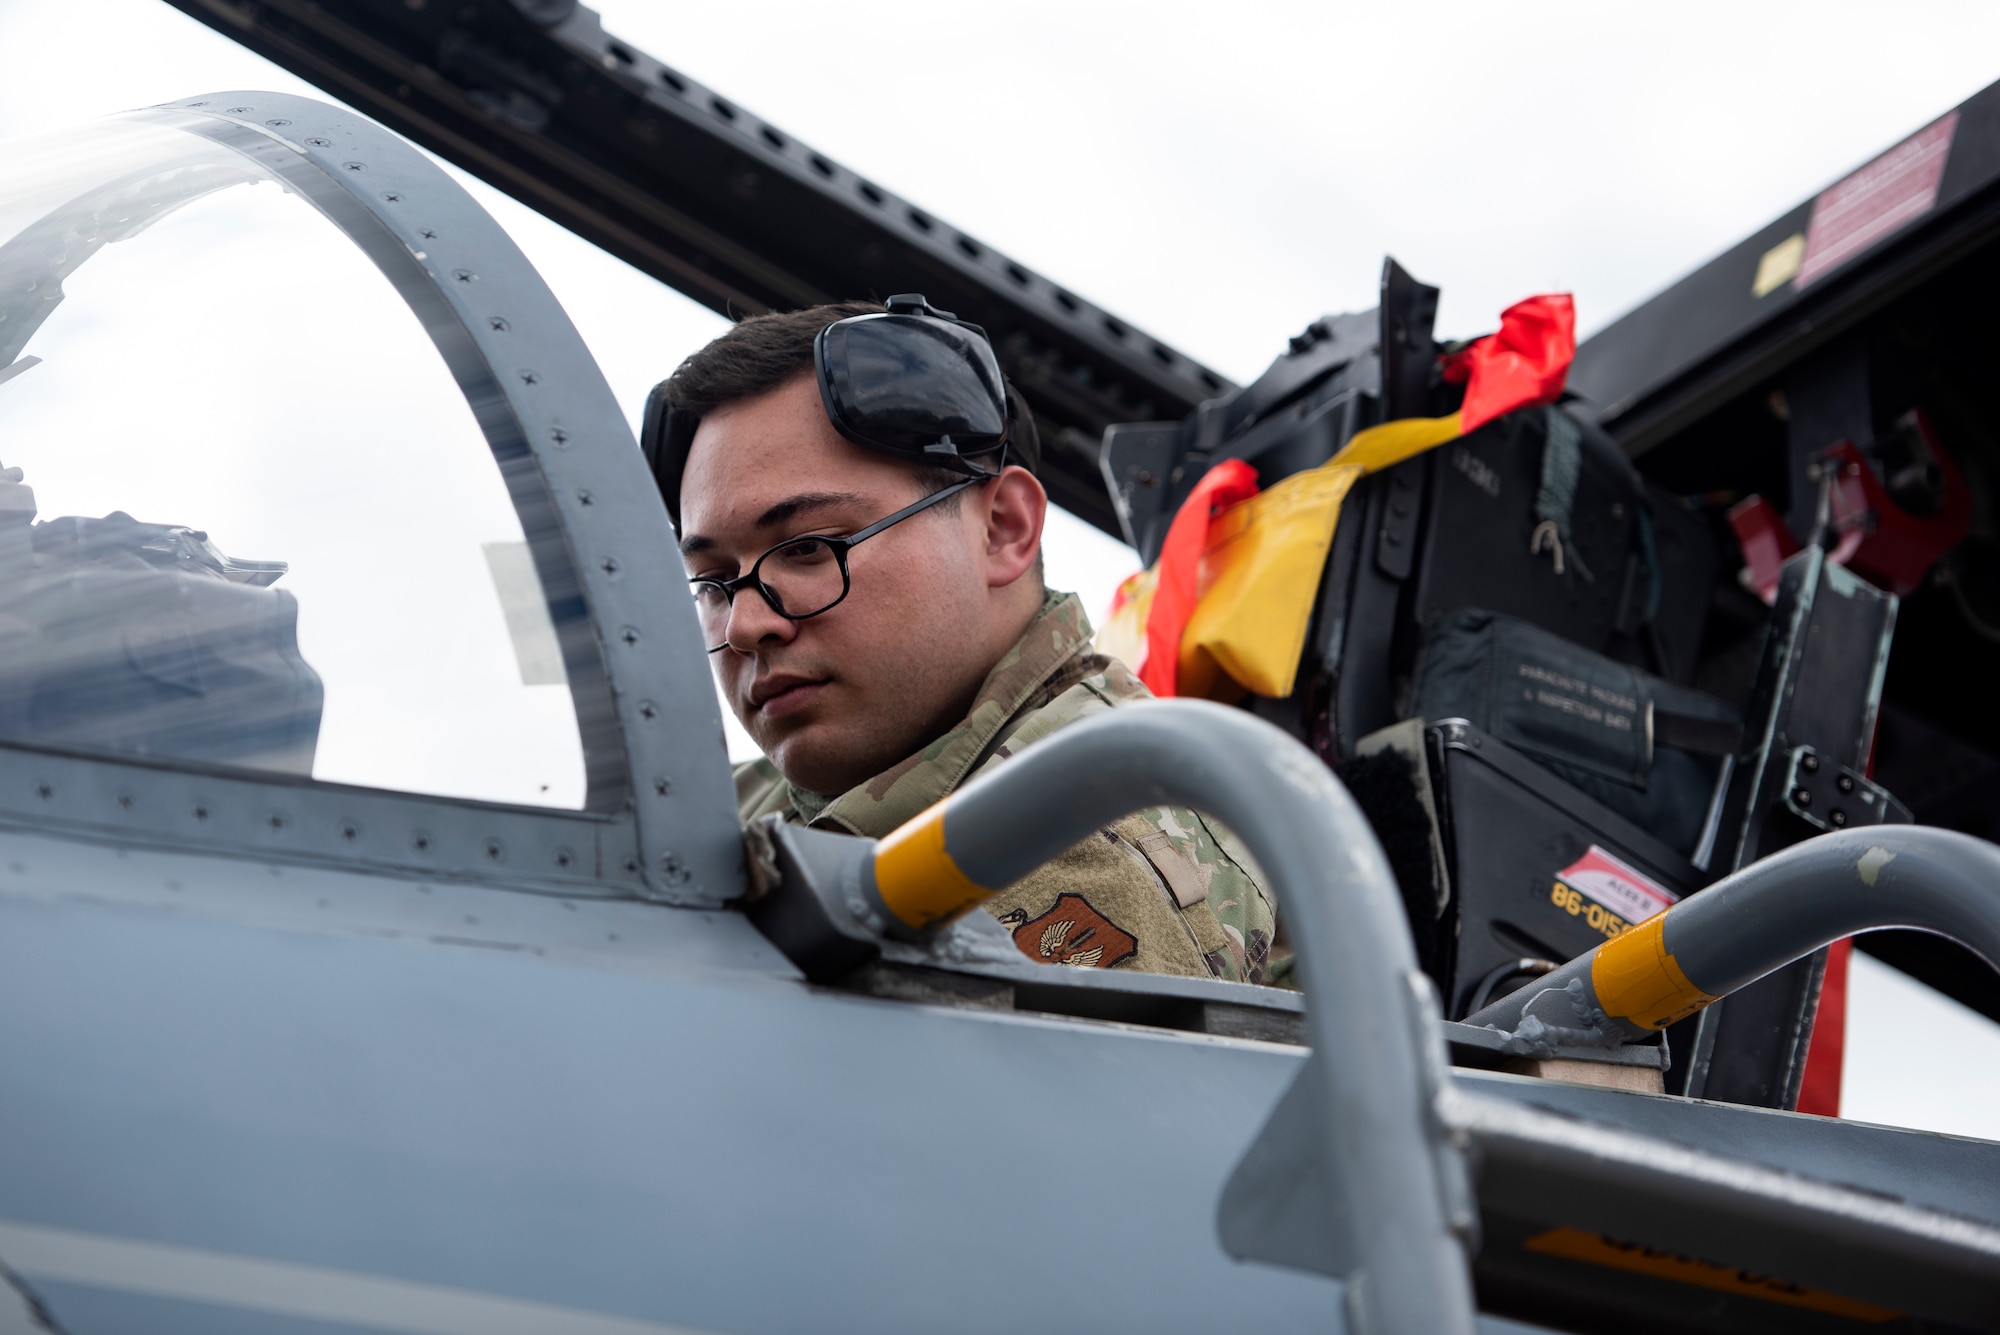 U.S. Air Force Airman 1st Class Nicholas Hackworth, a weapons load crew member assigned to the 748th Aircraft Maintenance Squadron, performs routine post-flight maintenance on an F15C Eagle at Royal Air Force Lakenheath, England, July 20, 2020. Aircraft maintainers perform various safety and function checks on aircraft including fluid levels, landing gear and flight control functionality, and running diagnostics on the electrical systems. (U.S. Air Force photo by Airman 1st Class Jessi Monte)